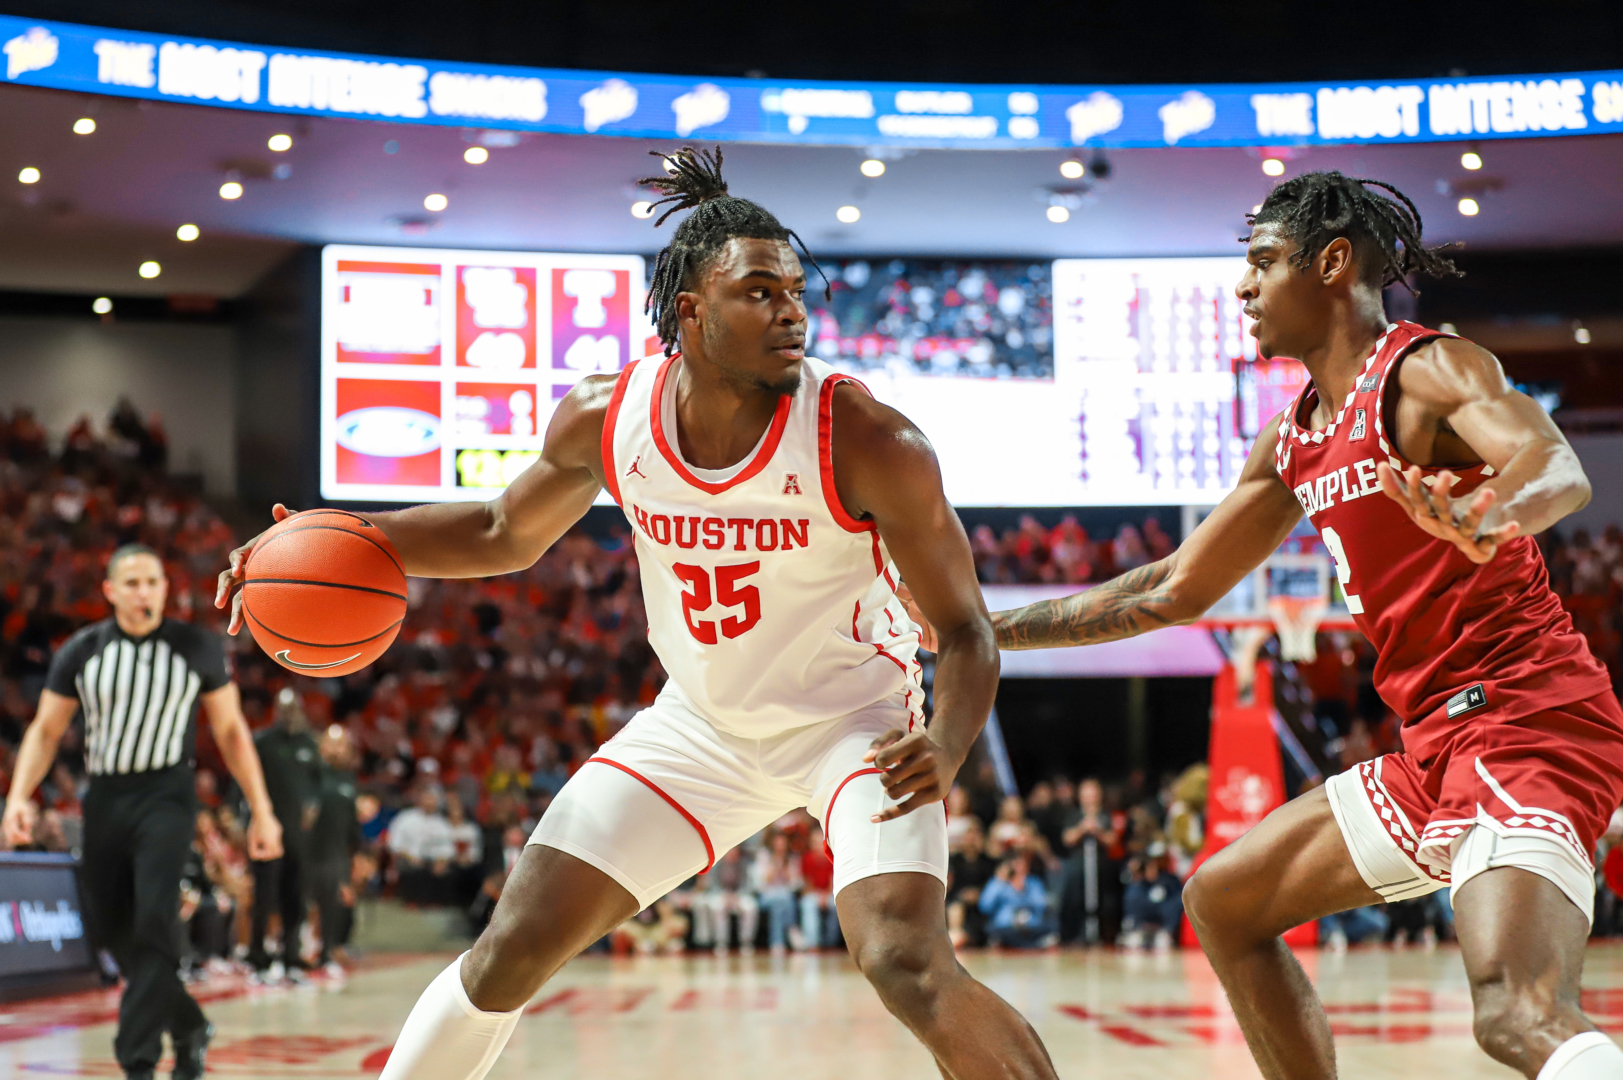 Jarace Walker led No. 3 UH with 23 points in the win over Temple on Sunday night in Philadelphia. | Anh Le/The Cougar